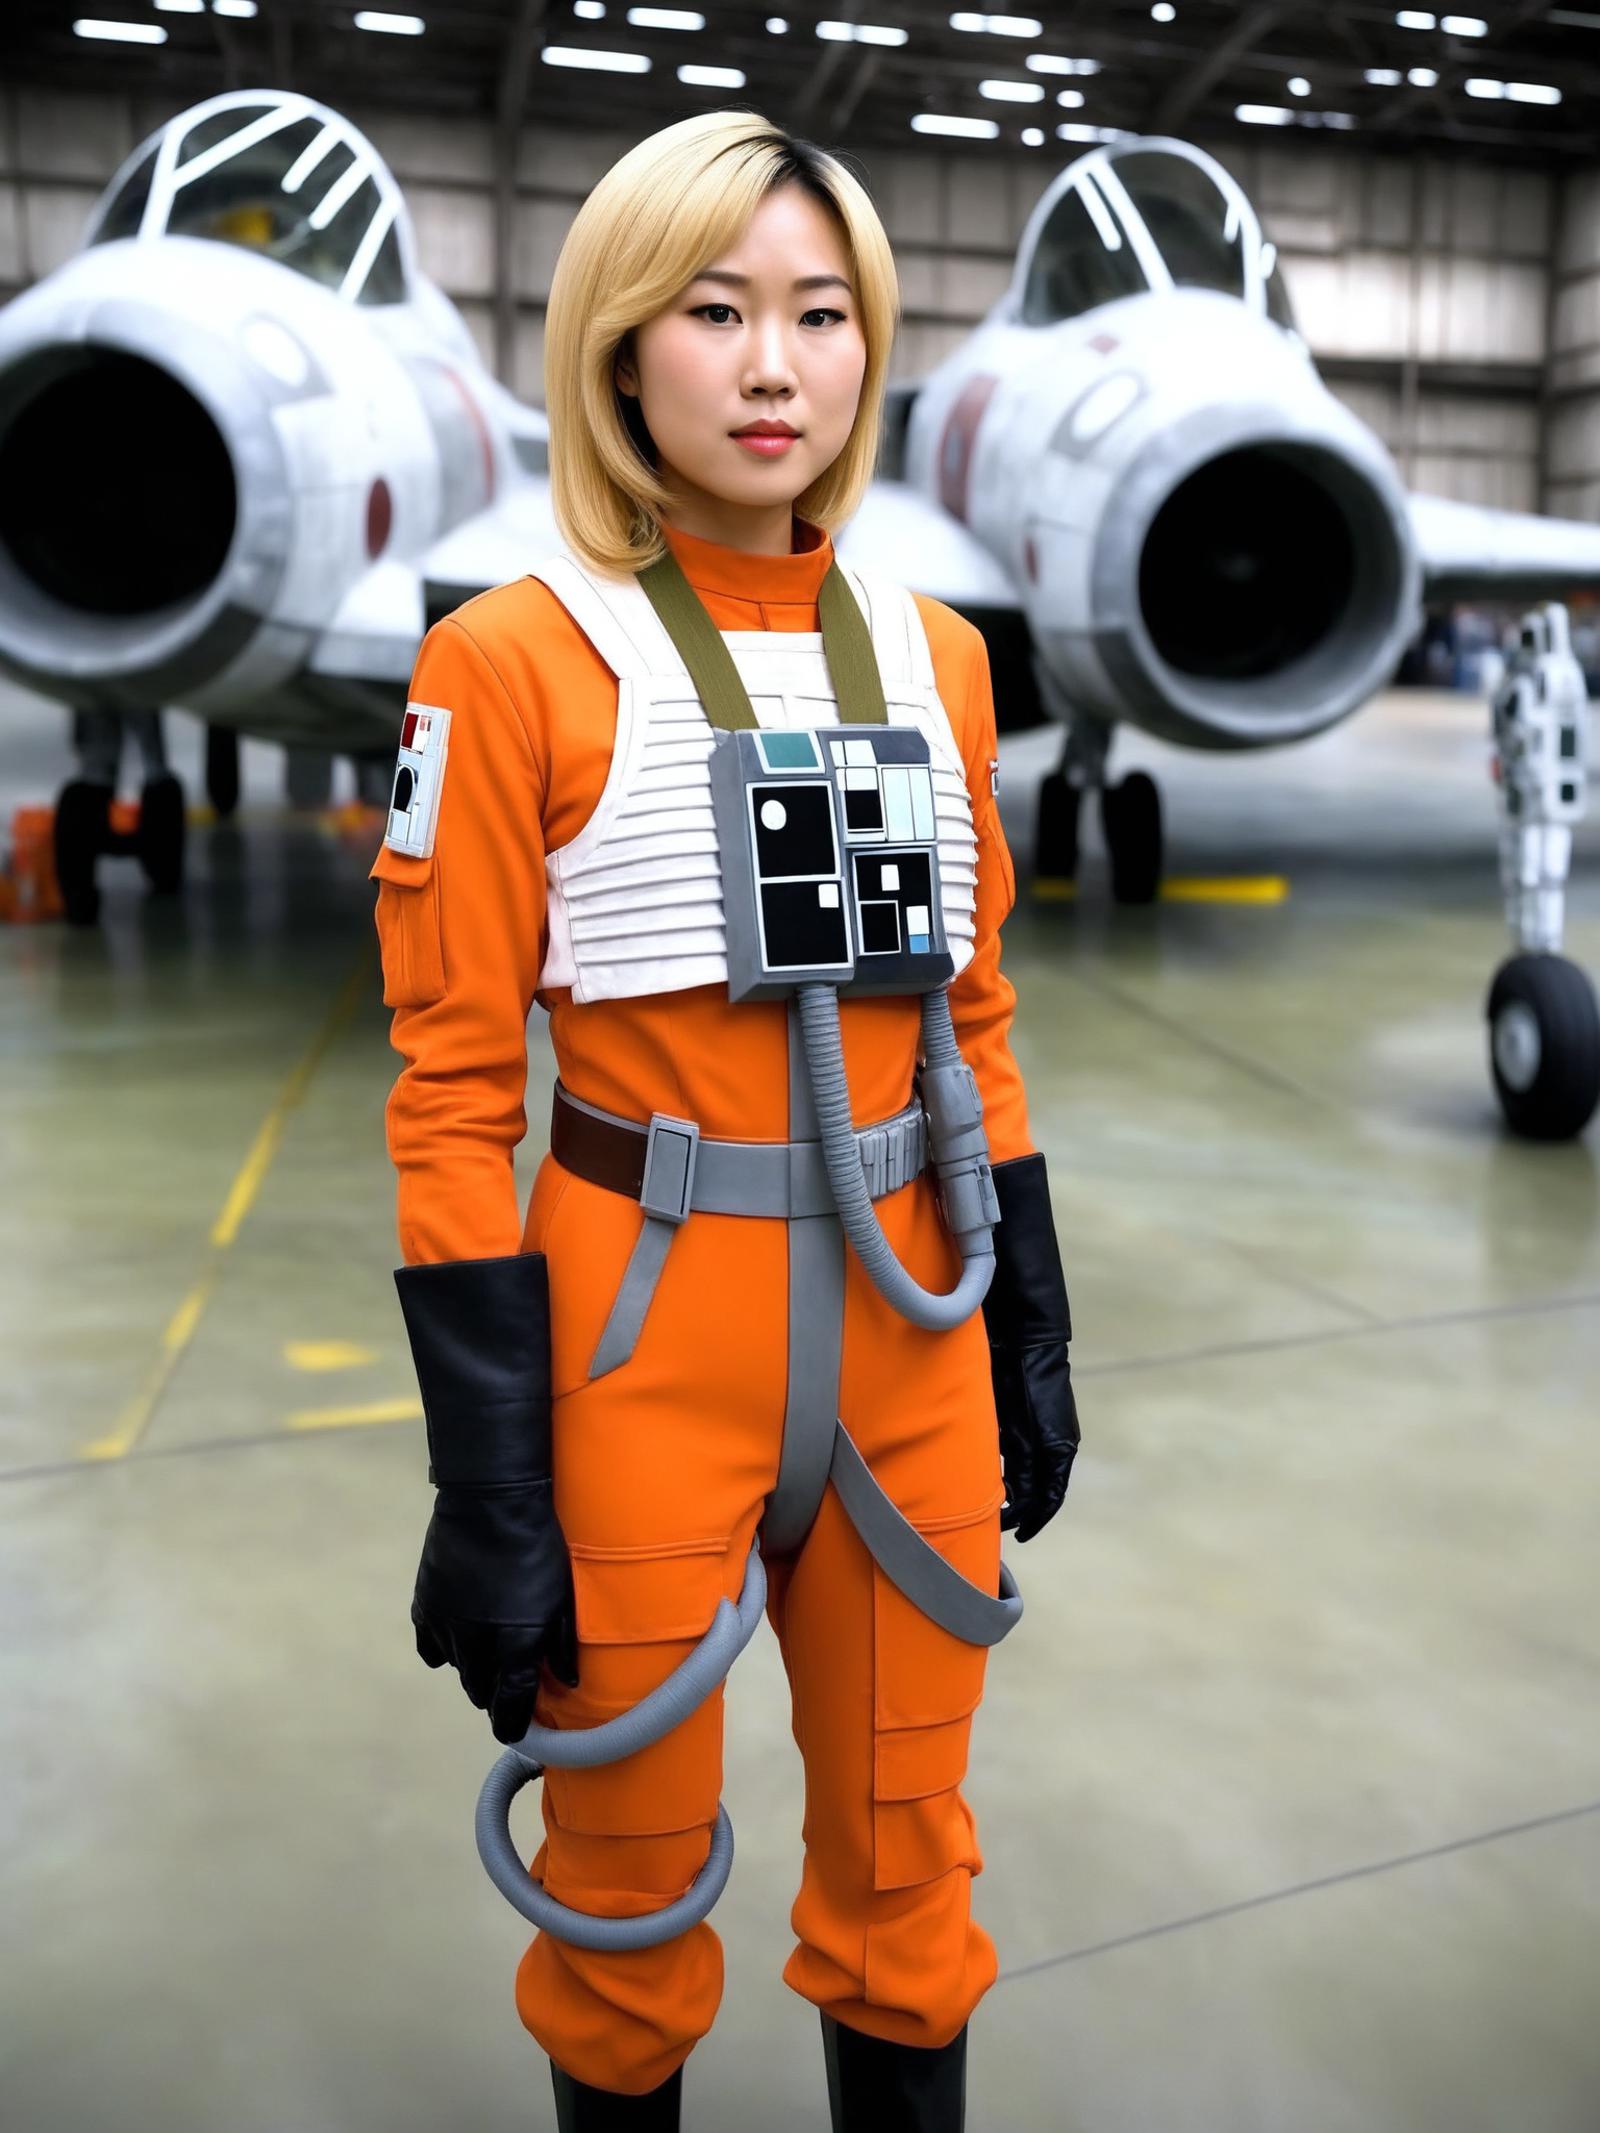 Star wars rebel pilot suit XL image by impossiblebearcl4060